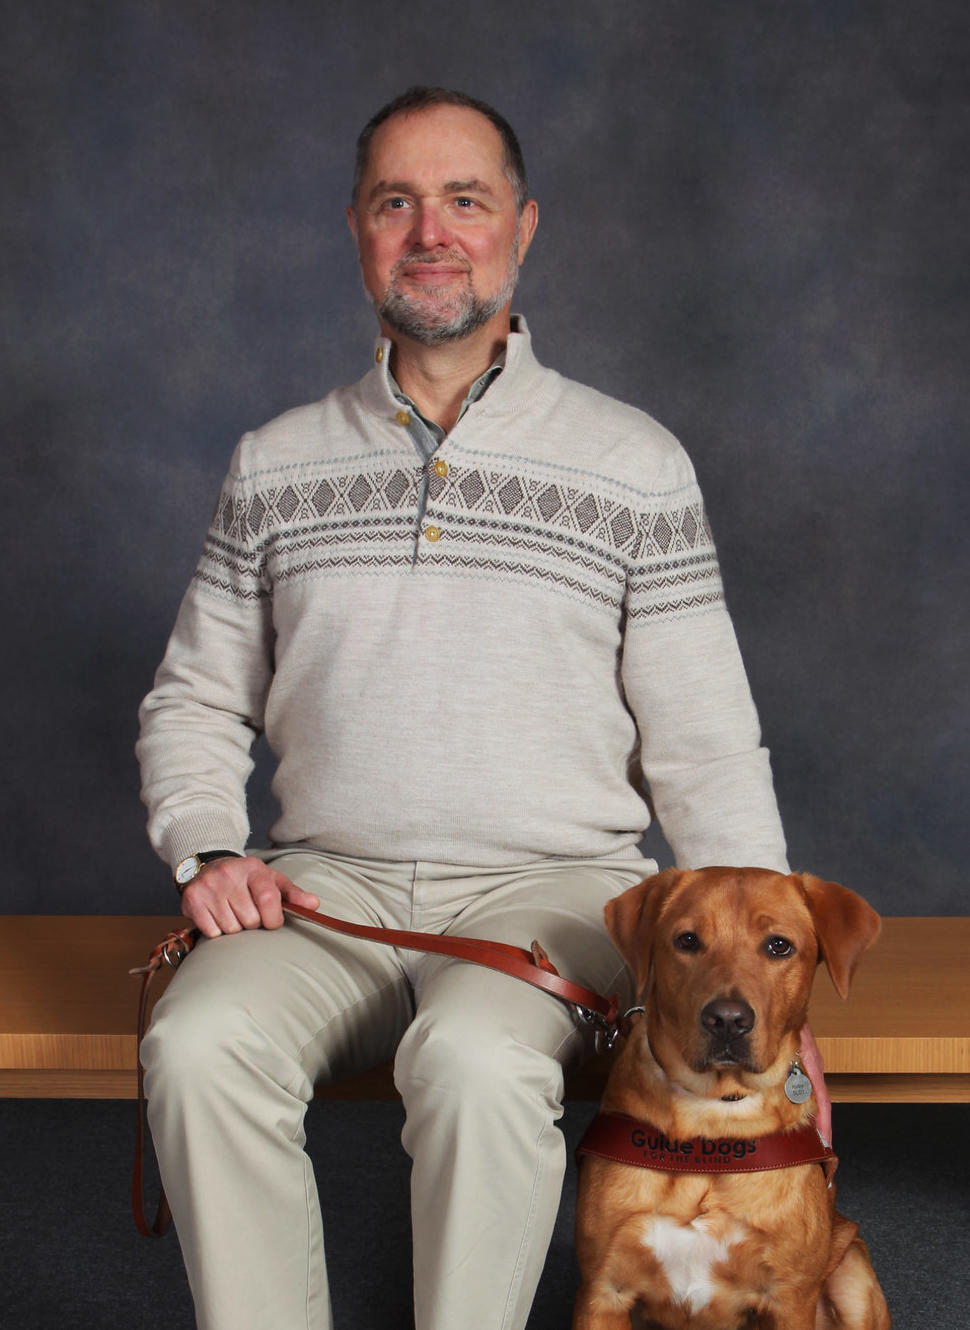 Michael Gottheil, and his service dog Kirby. Kirby is a male Yellow Labrador Retriever.